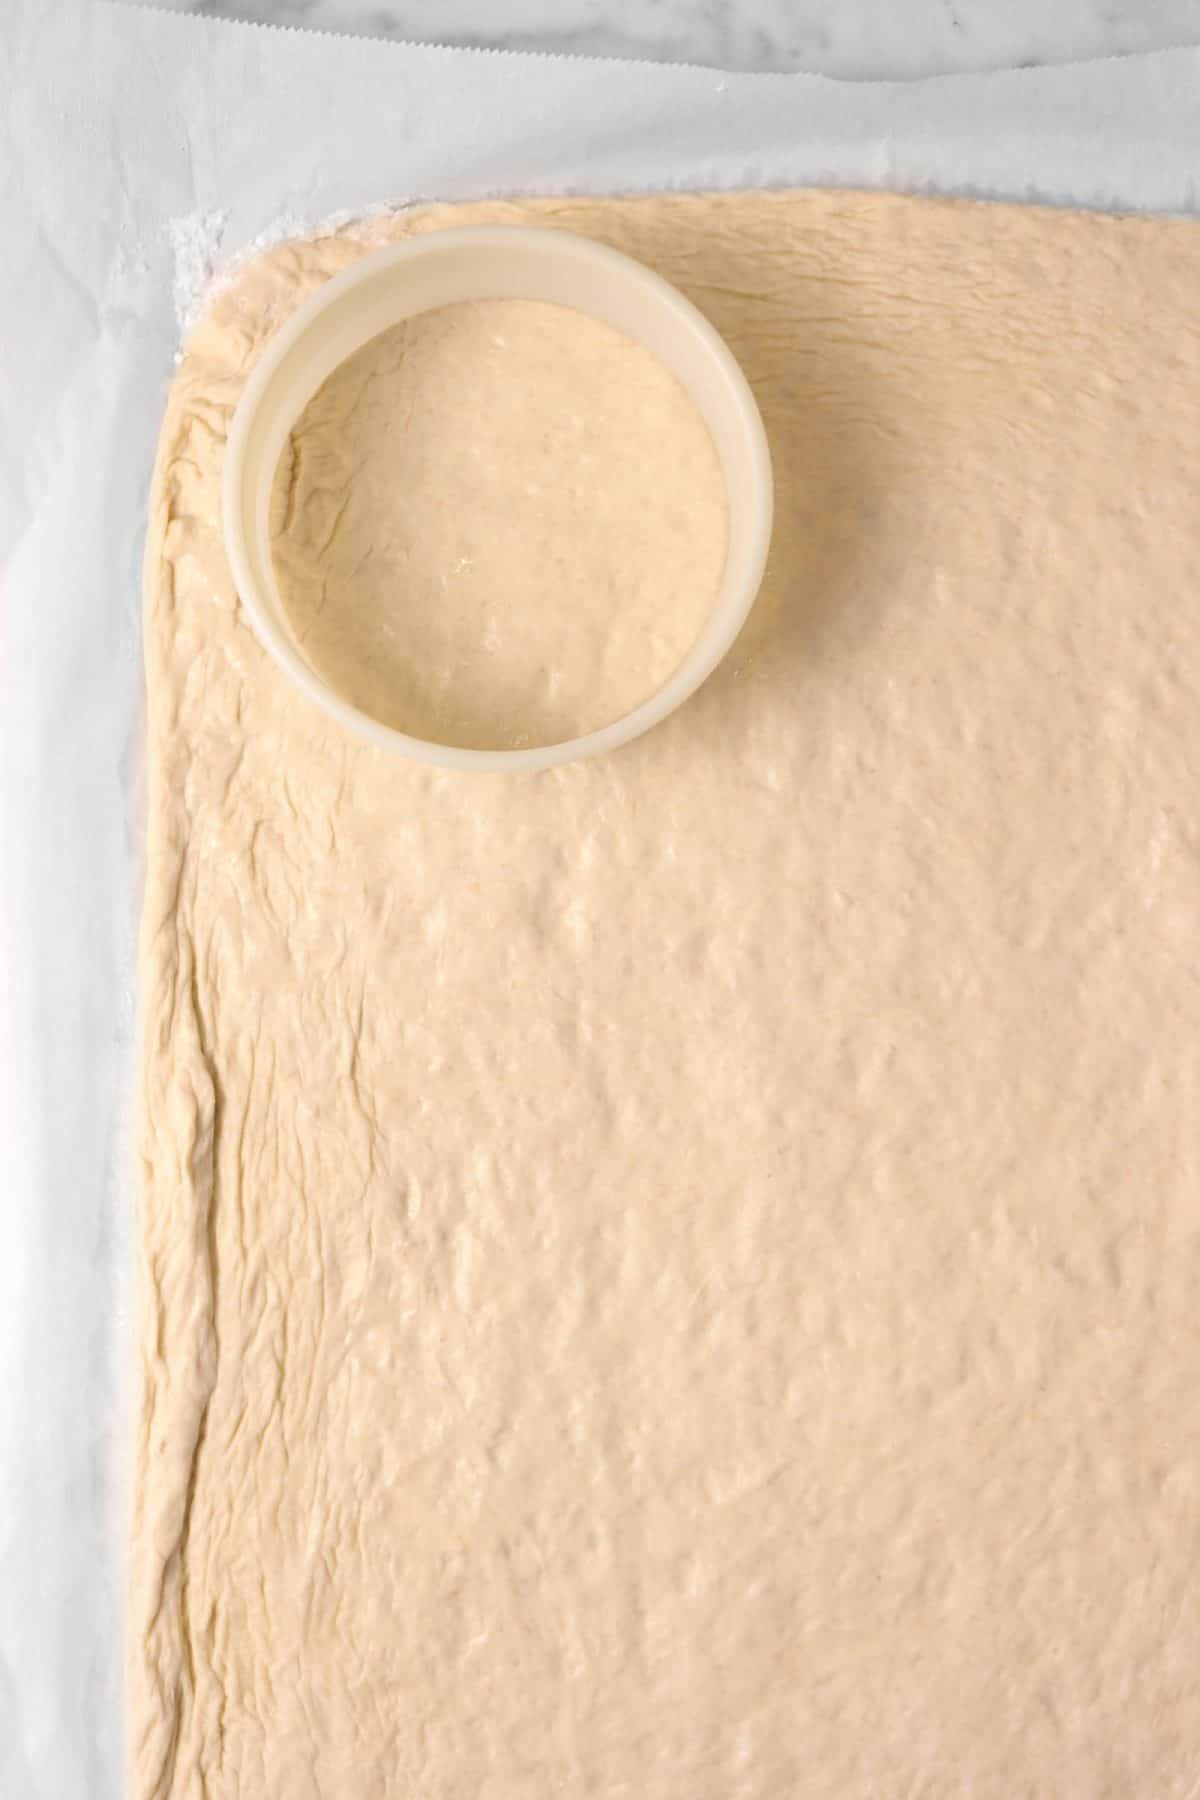 dough being cut on a piece of parchment